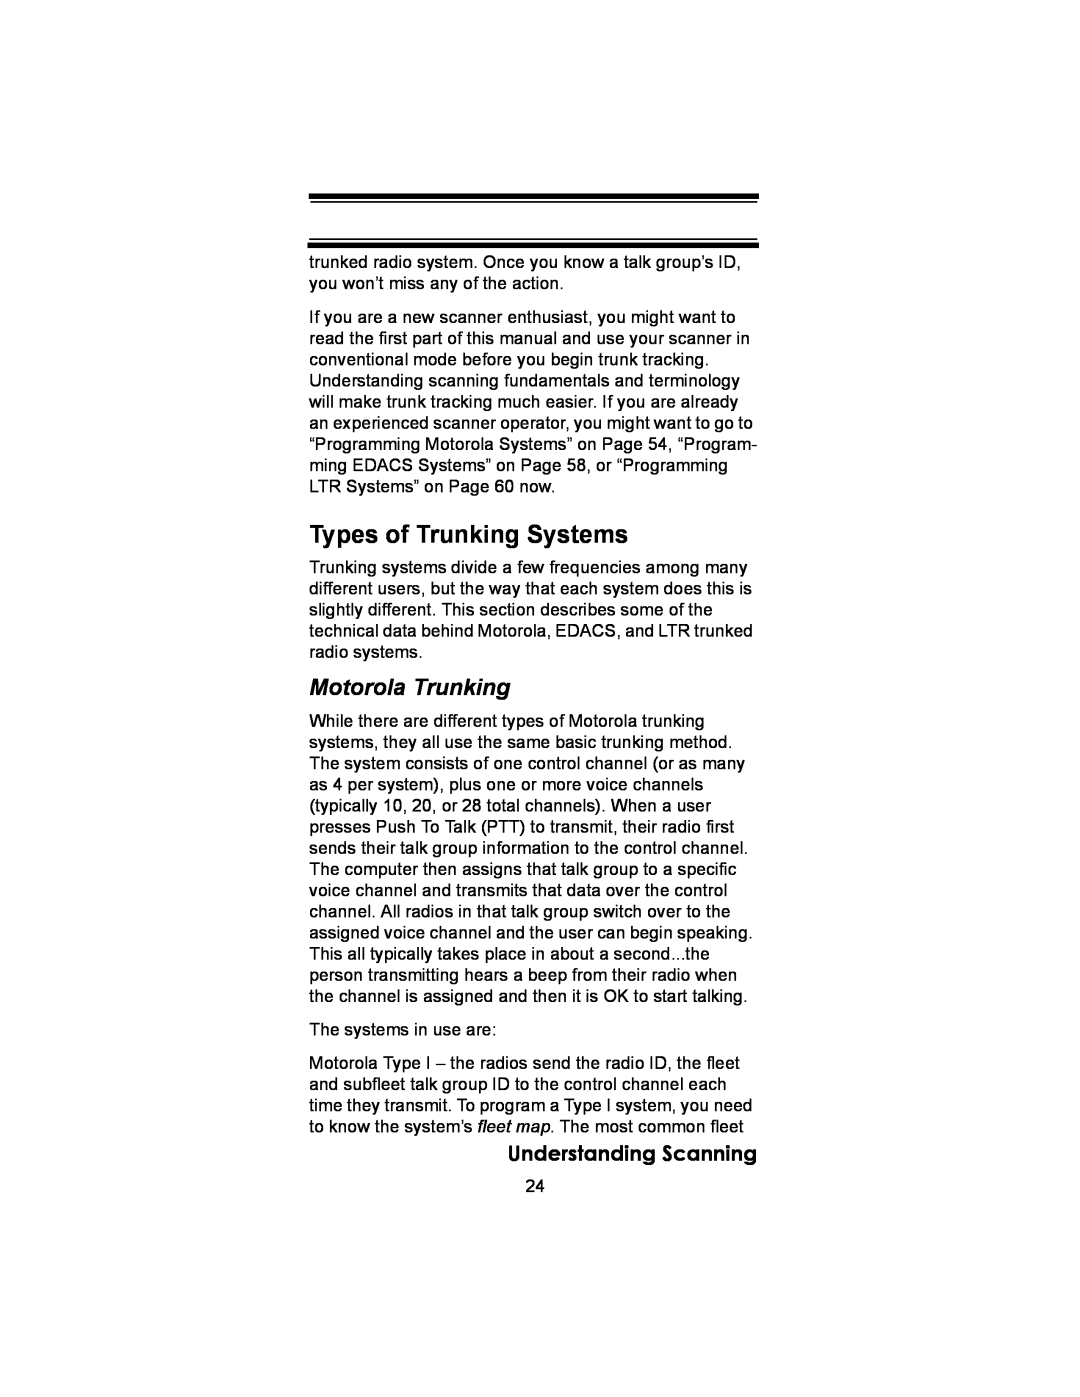 Uniden BC246T owner manual Types of Trunking Systems, Motorola Trunking, Understanding Scanning 